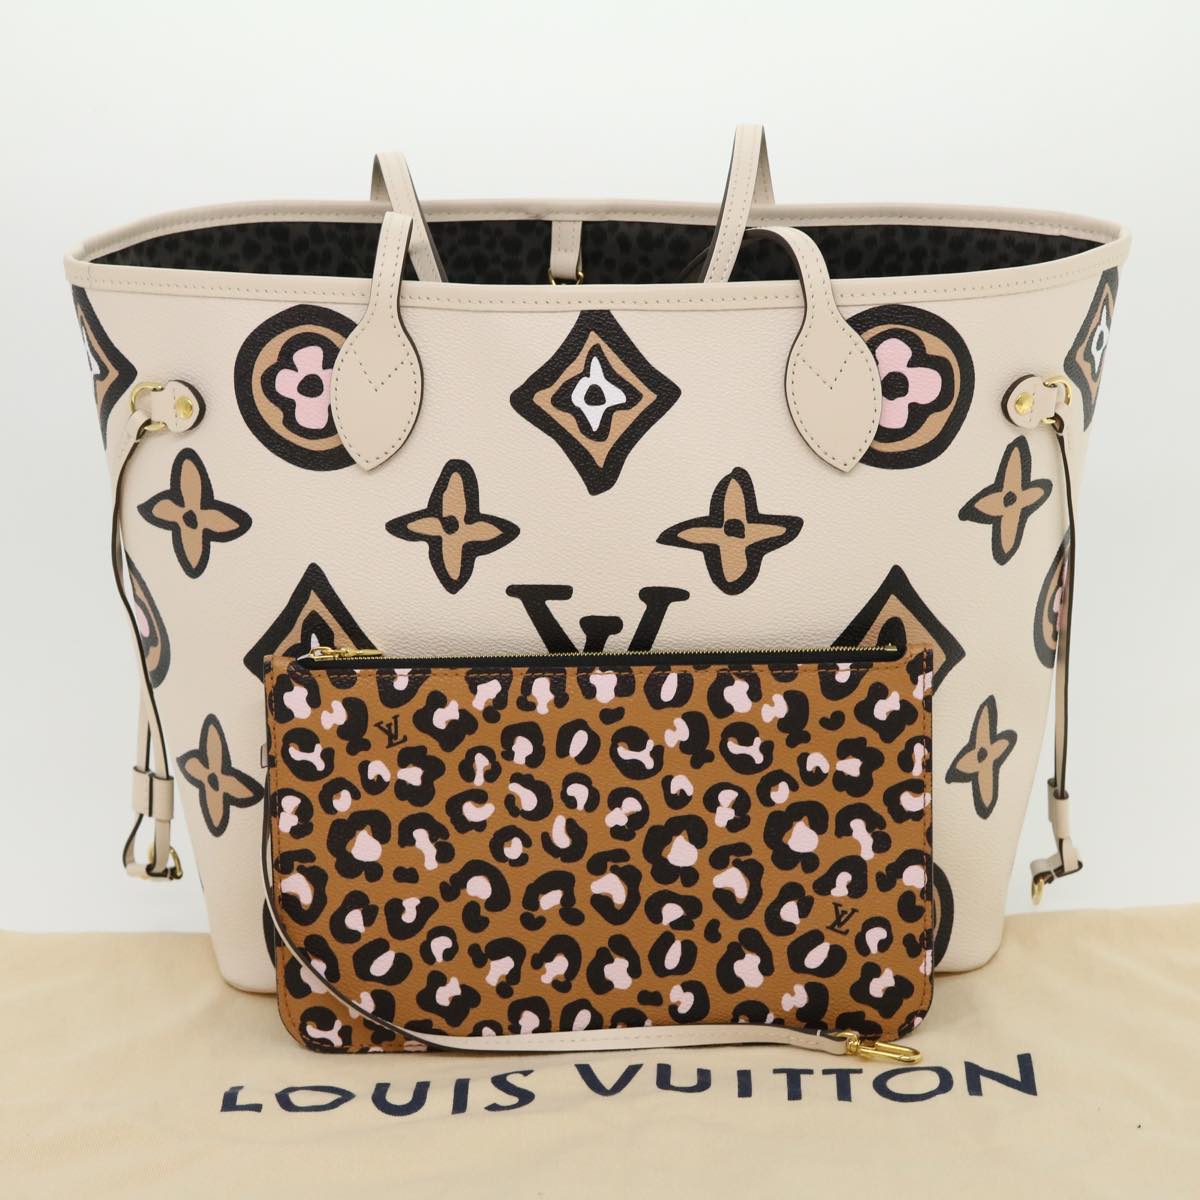 LOUIS VUITTON Monogram Wild at Heart Neverfull MM Tote Bag M45819 Auth 30747A